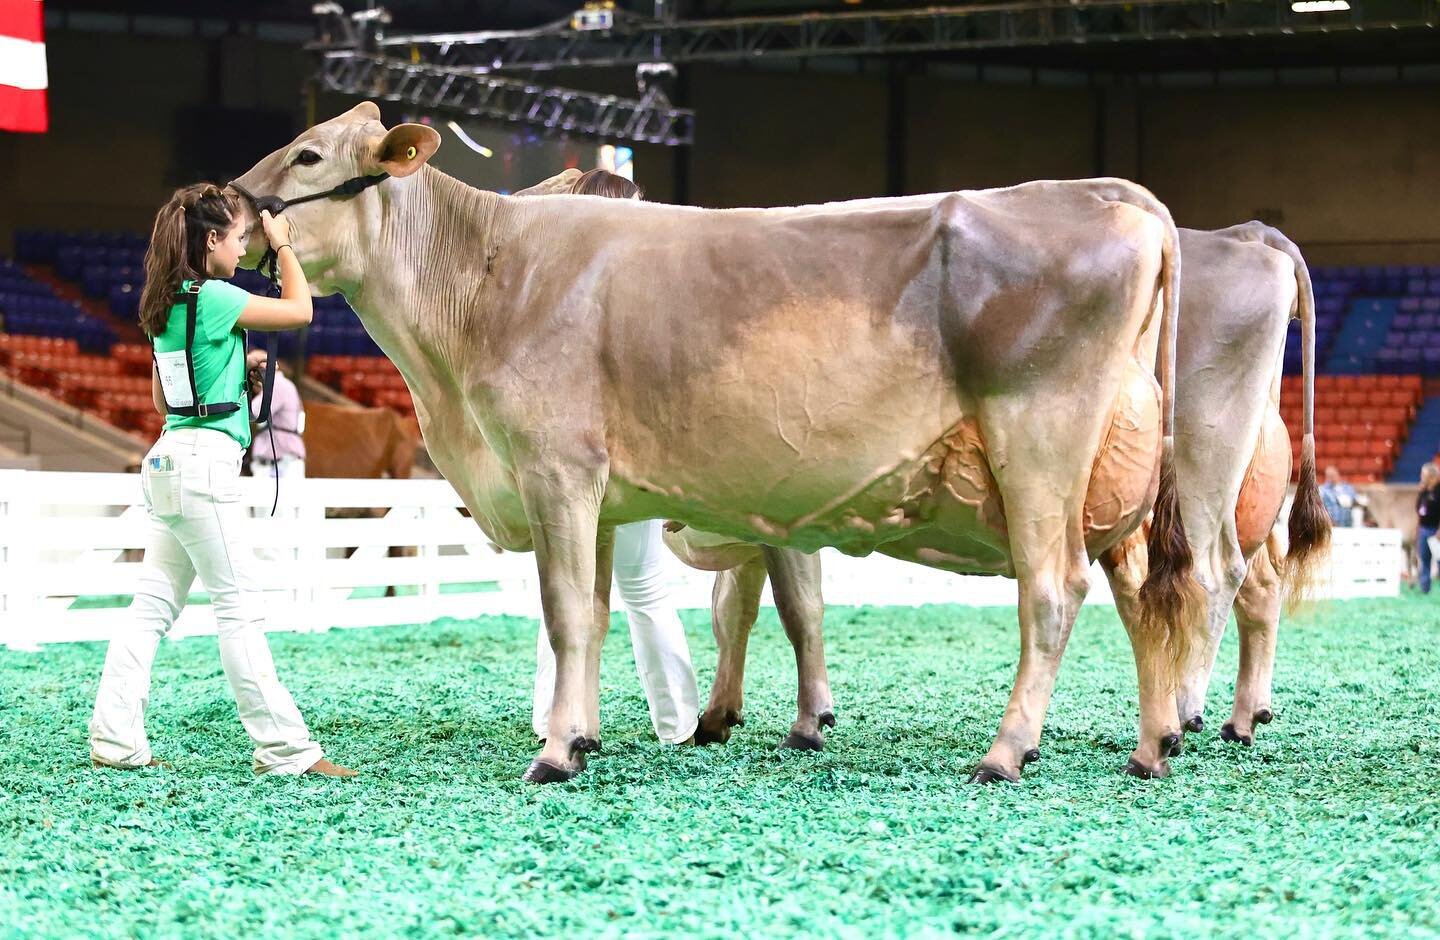 We might be a little biased, but we know we have some pretty ladies that call Legacy Dairy home. Six of those ladies competed at the Kentucky State Fair this past week and accolades included Grand Champion Brown Swiss, Reserve Grand Champion Brown Sw